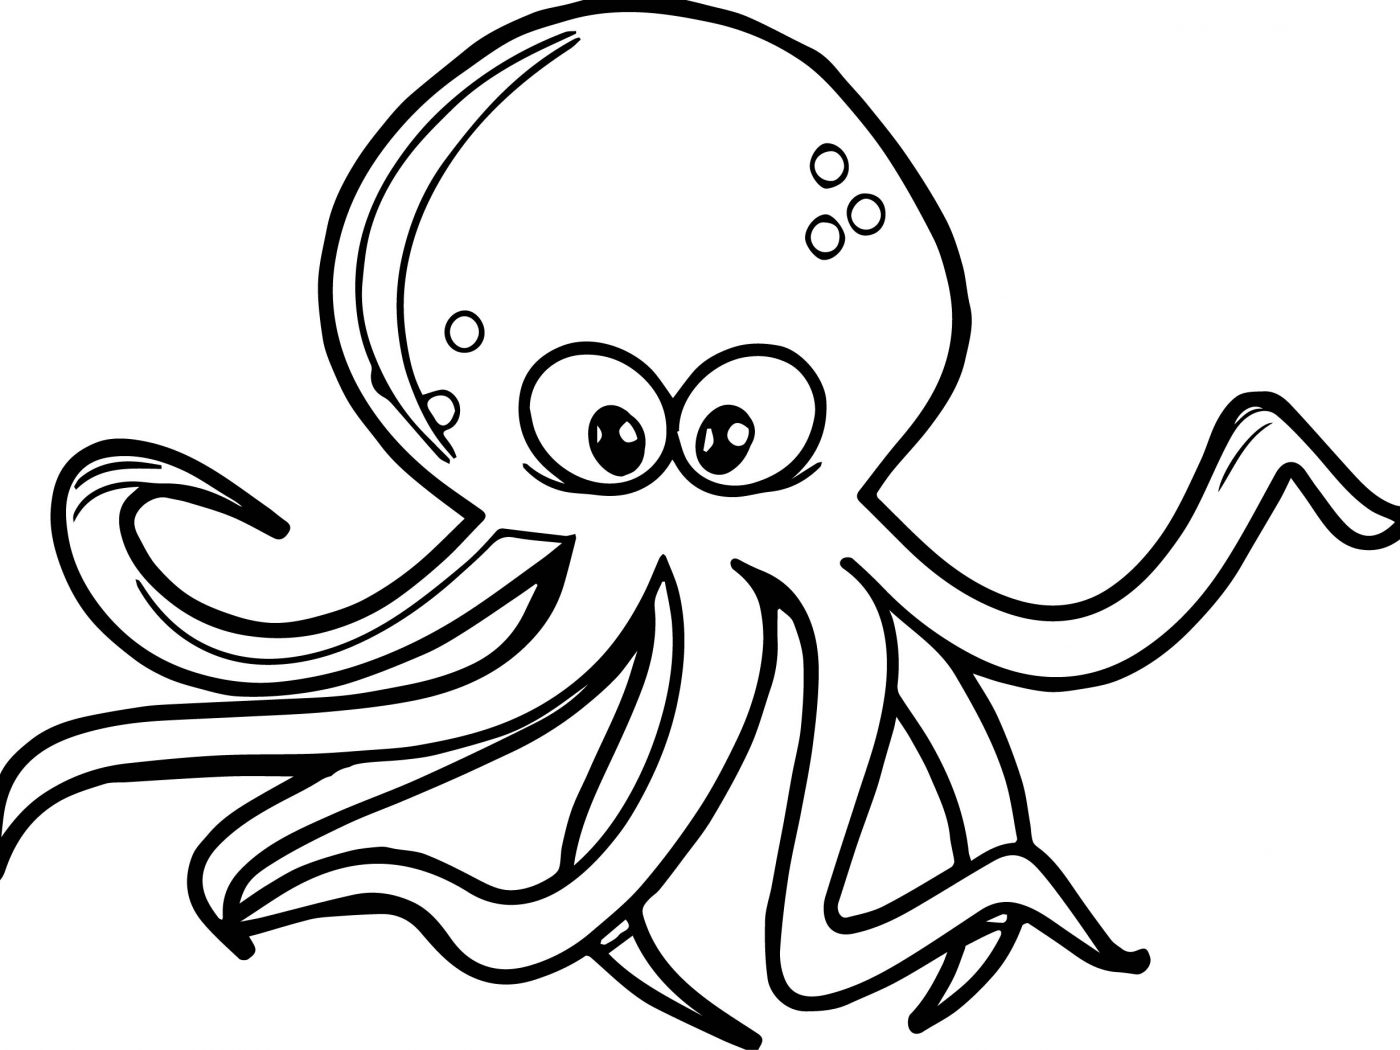 Free Printable Octopus Coloring Pages at GetDrawings | Free download